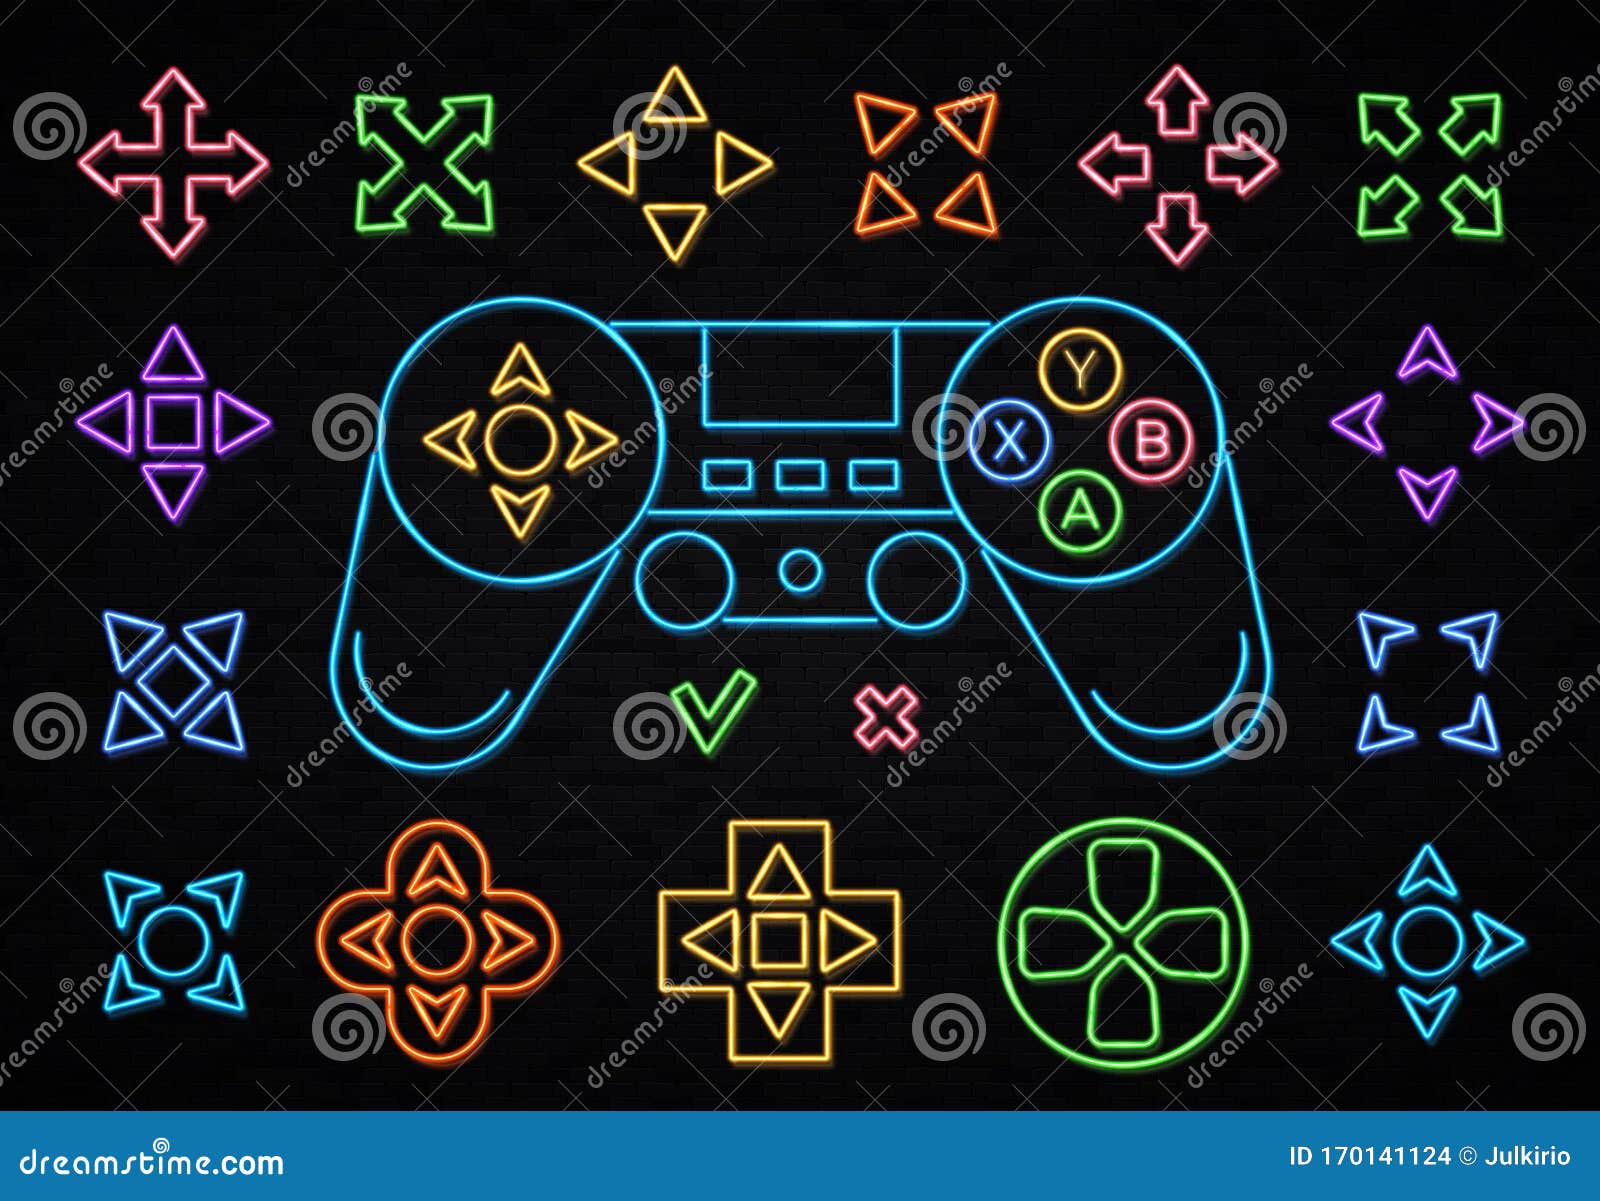 Neon Color Joystick Icon Set Isolated on Black Background. Wireless Gamepad  Sign Neon Outlines. Play Game Light Design Stock Illustration -  Illustration of internet, arrow: 170141124